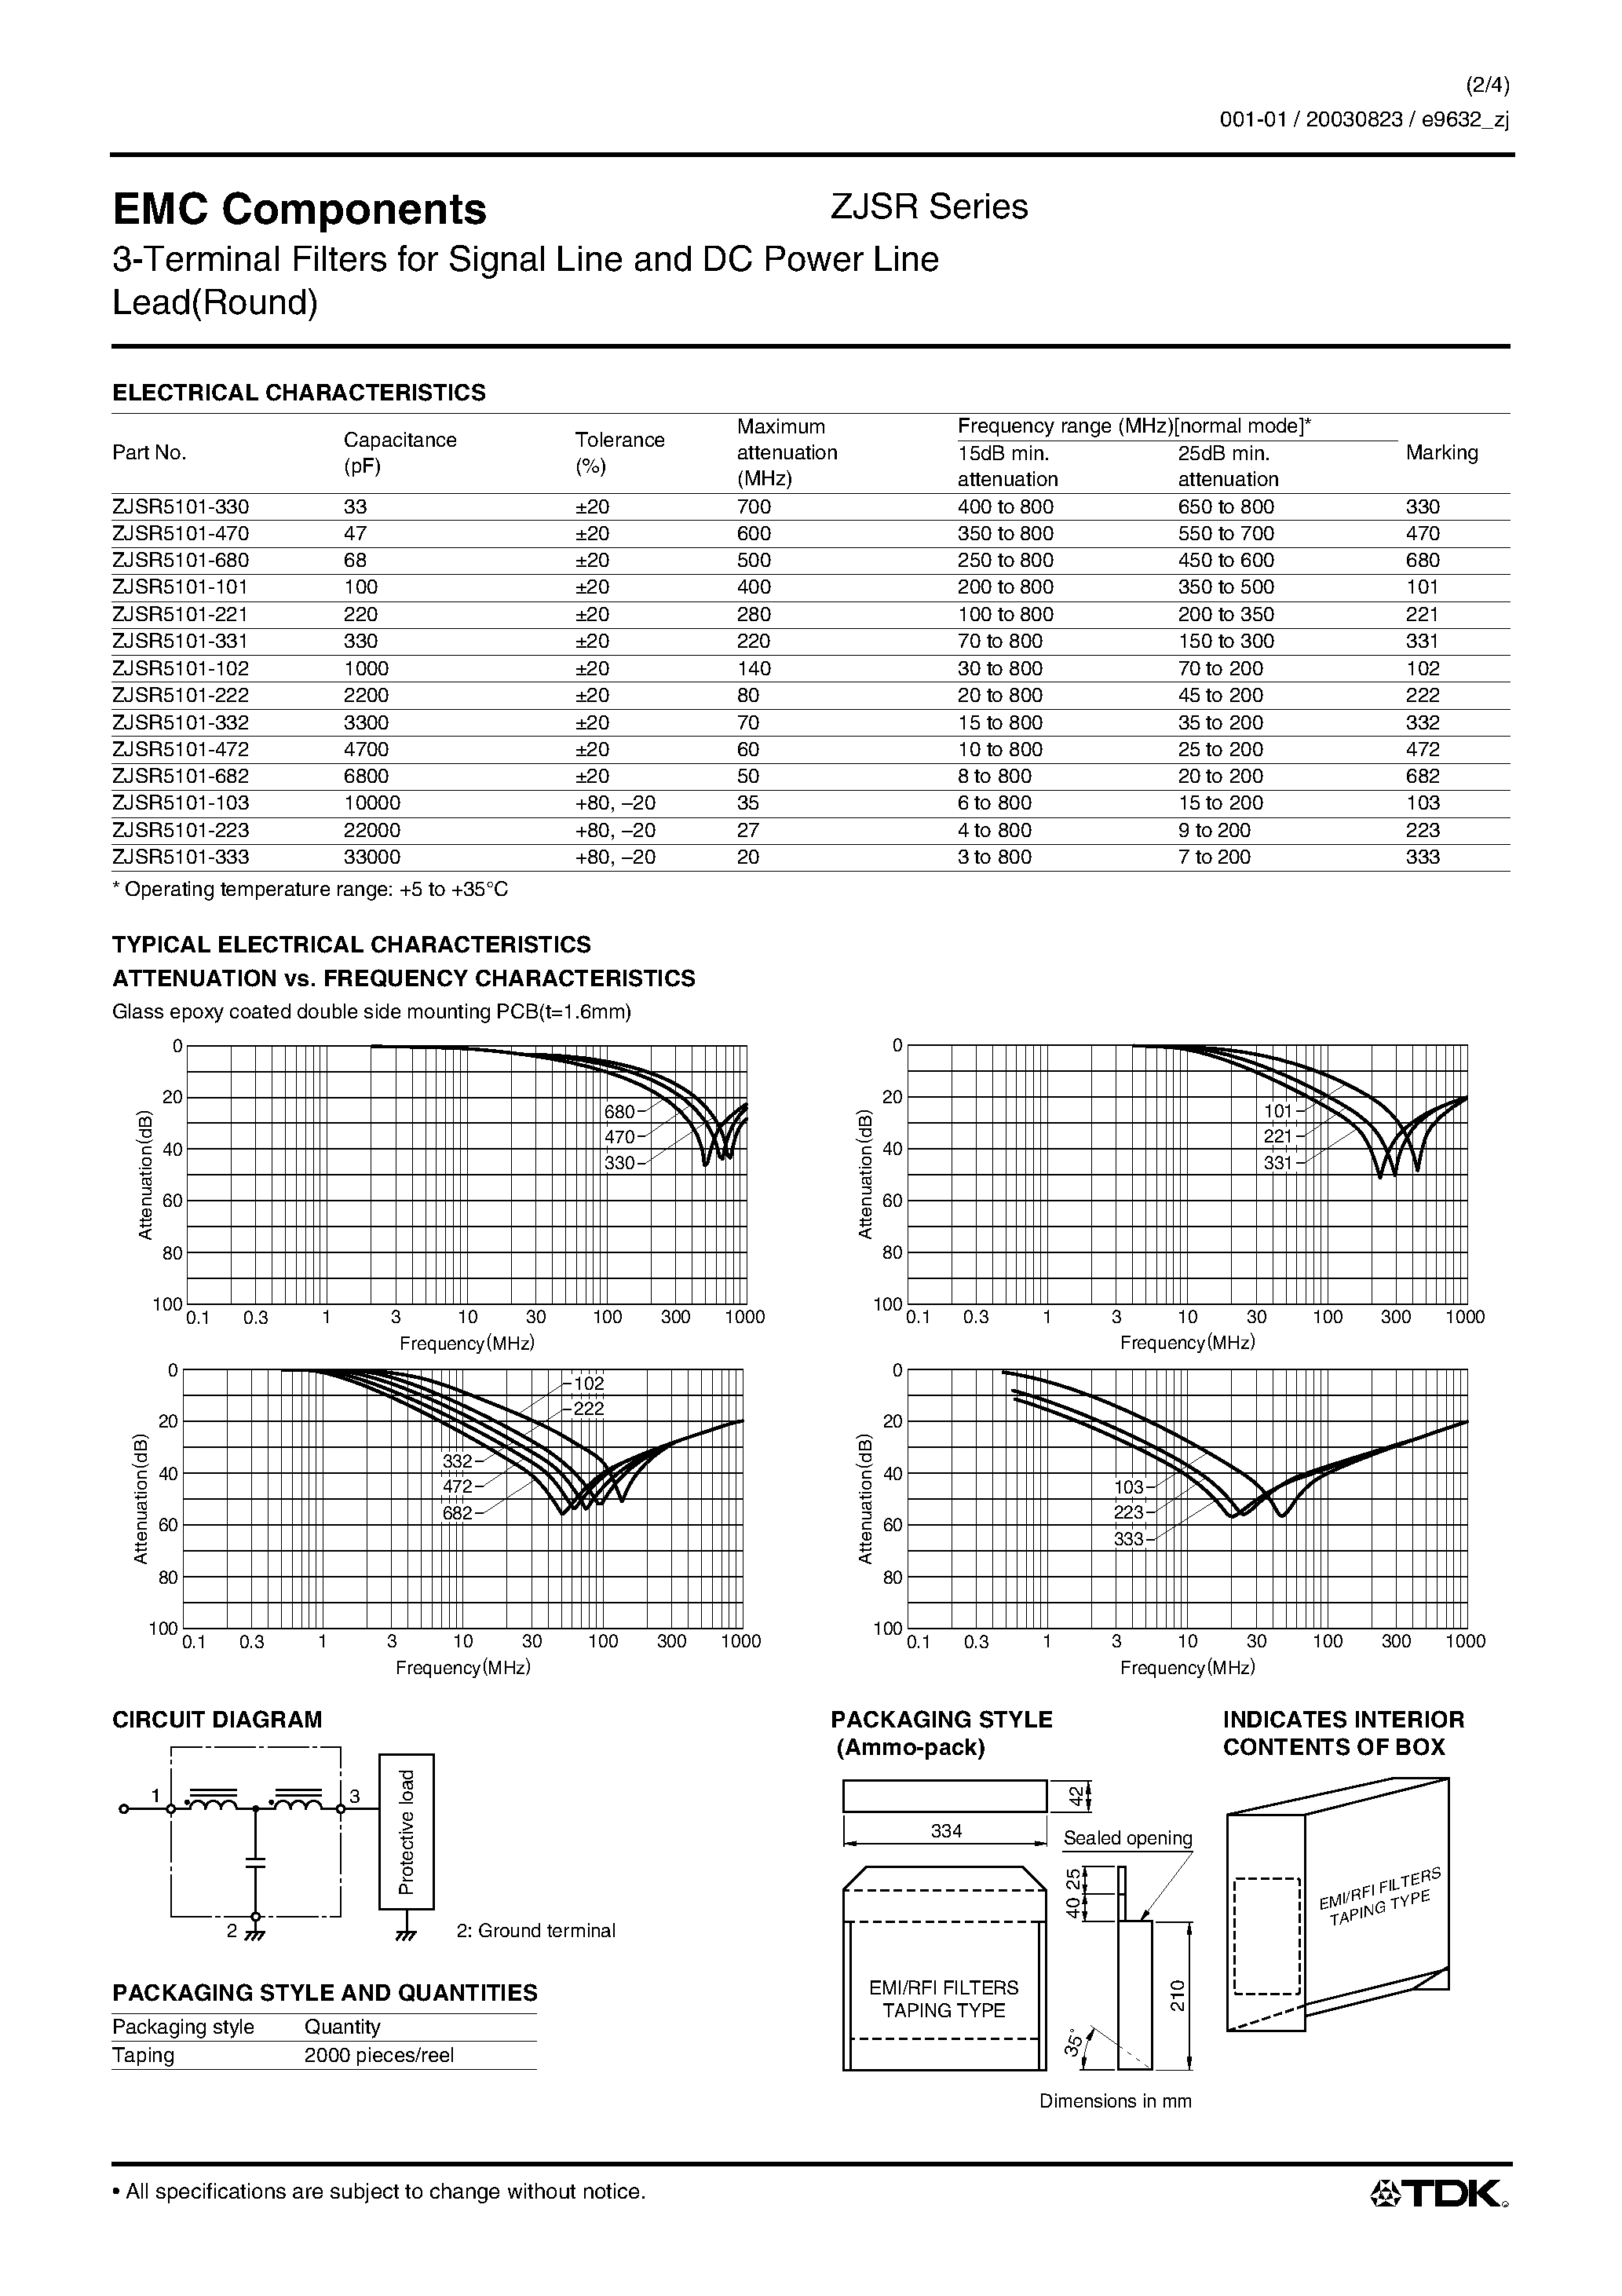 Datasheet ZJSR5101-xxx - EMC Components / 3-Terminal Filters for Signal Line and DC Power Line page 2